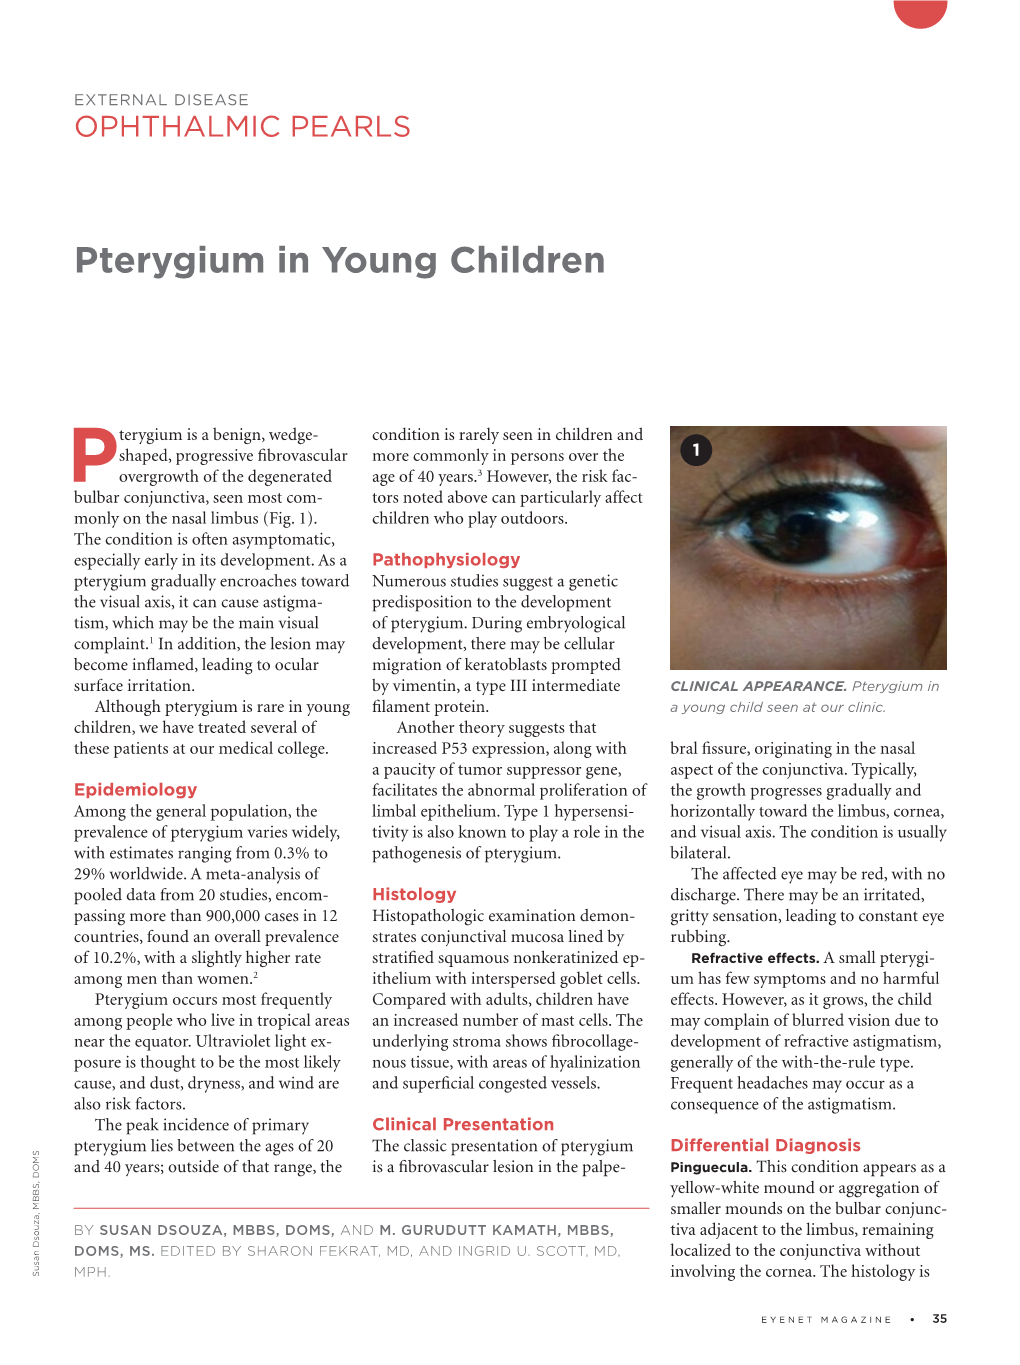 Pterygium in Young Children